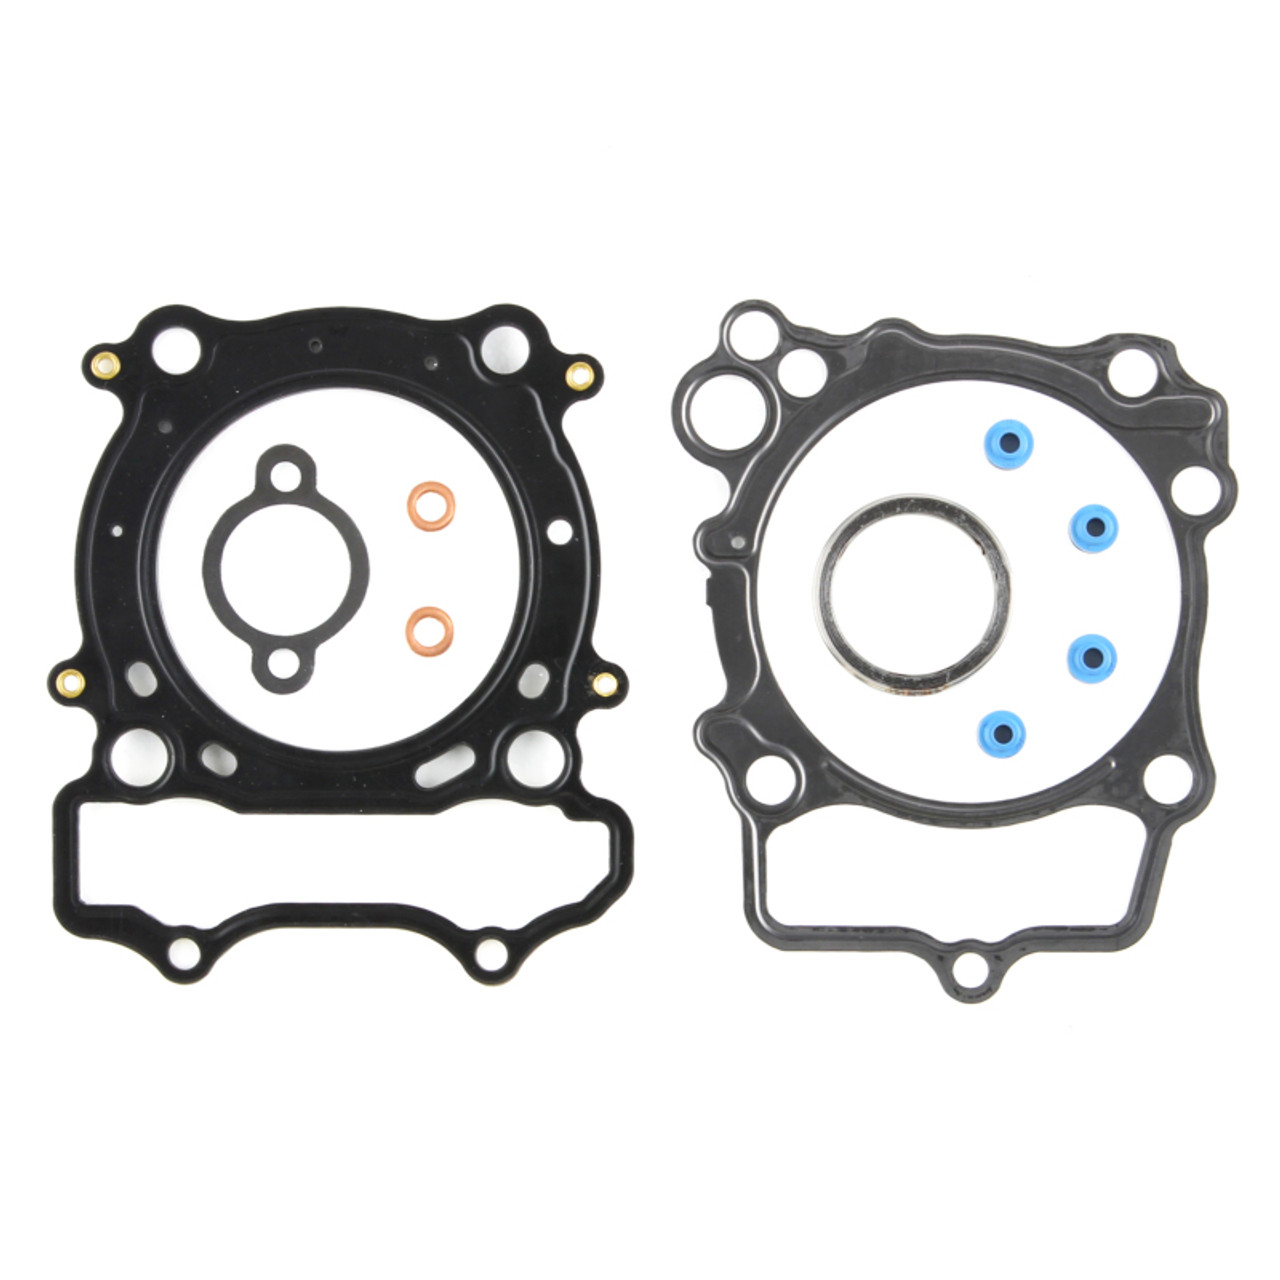 Cometic 19-23 Yamaha YZ250F 77mm Bore Top End Gasket Kit - C3695 Photo - Primary